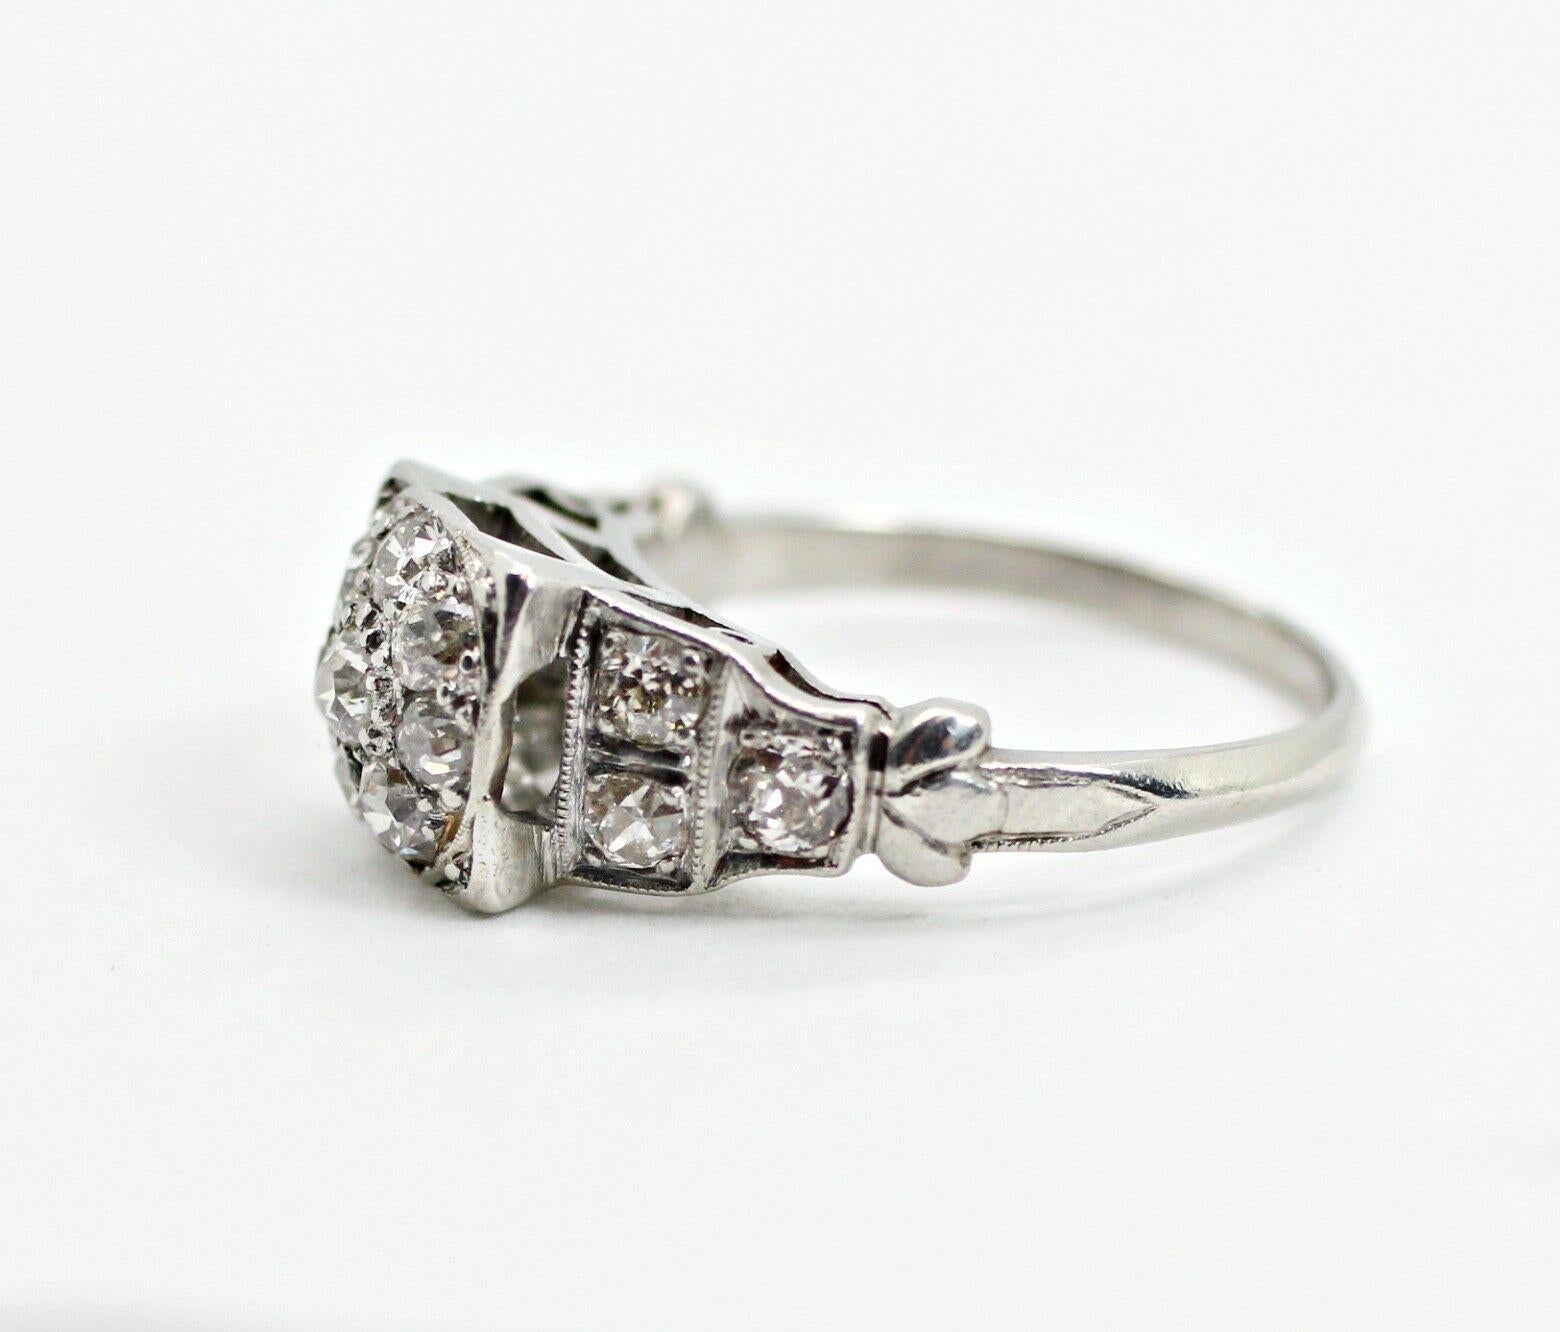 A vintage platinum diamond cluster ring, popular in the mid-20th century, with 14 pieces old miner rounds, approximately 1.12 in carat total weight. The diamonds are I in color, and VS2 - SI1 in clarity. It's current ring size is 5.25 US but can be